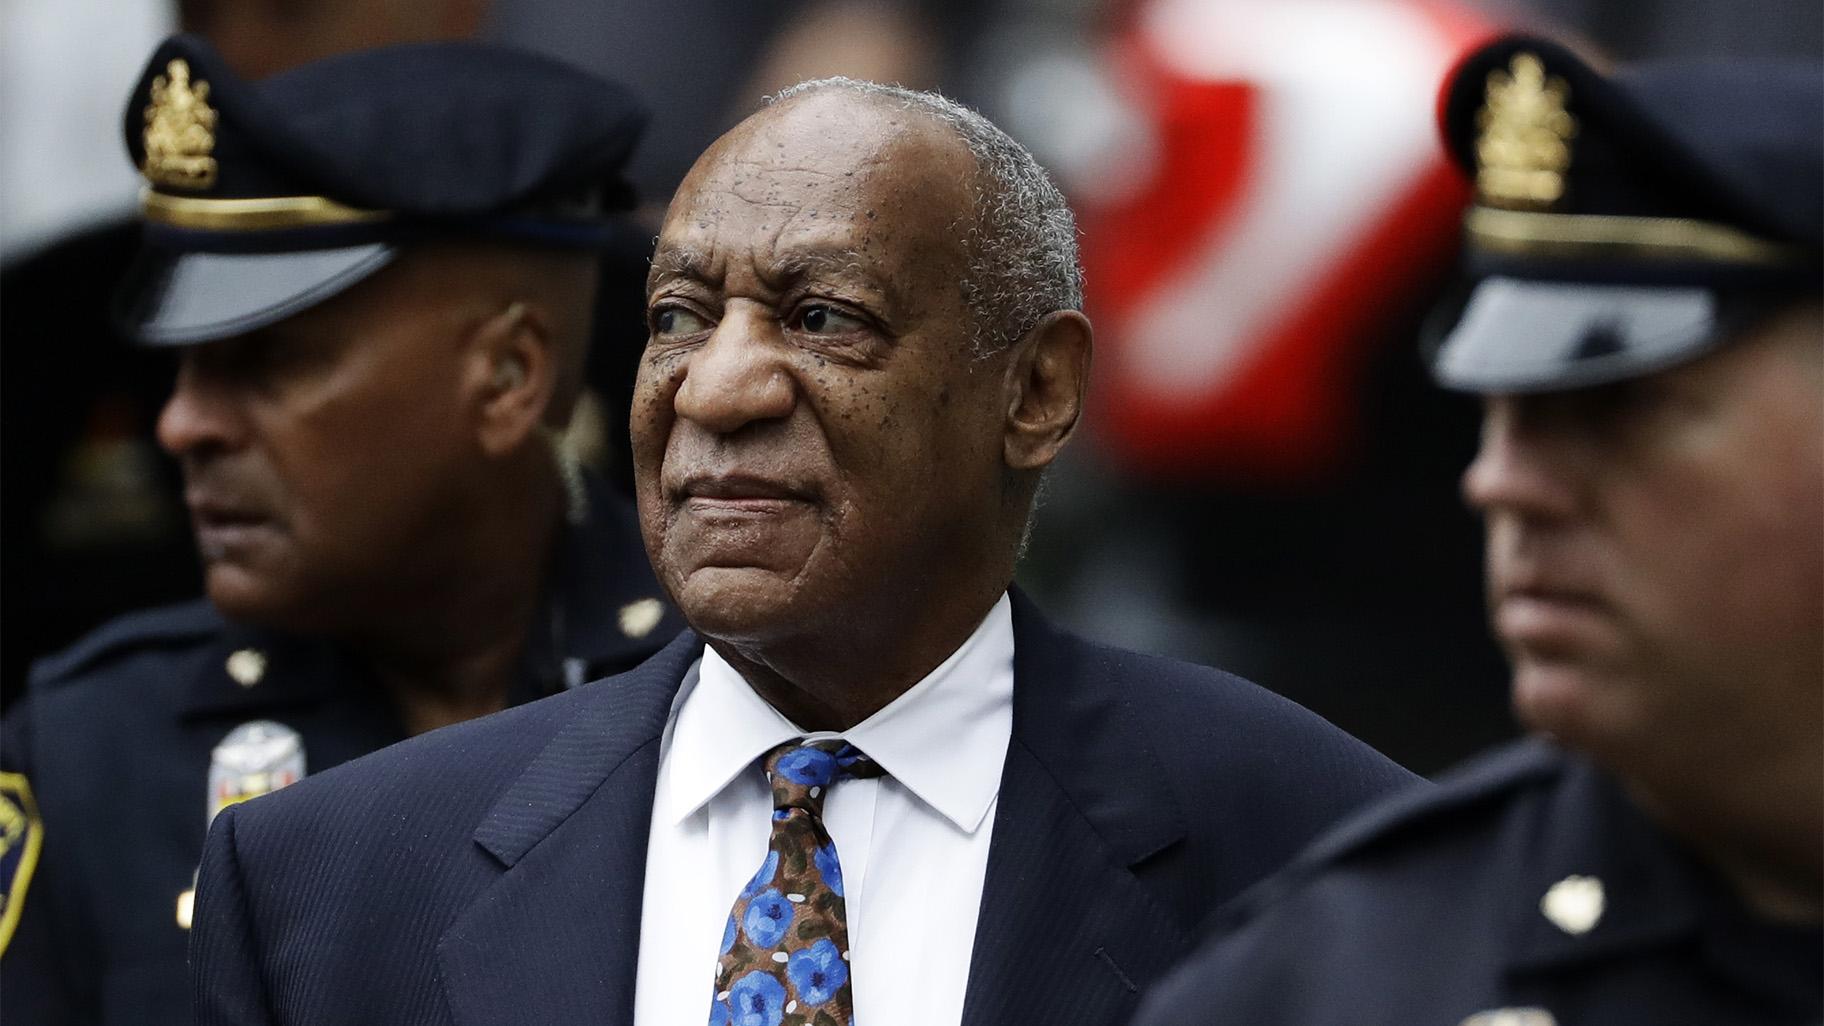 FILE - In this Sept. 24, 2018 file photo, Bill Cosby arrives for his sentencing hearing at the Montgomery County Courthouse, in Norristown, Pa. (AP Photo / Matt Slocum, File)